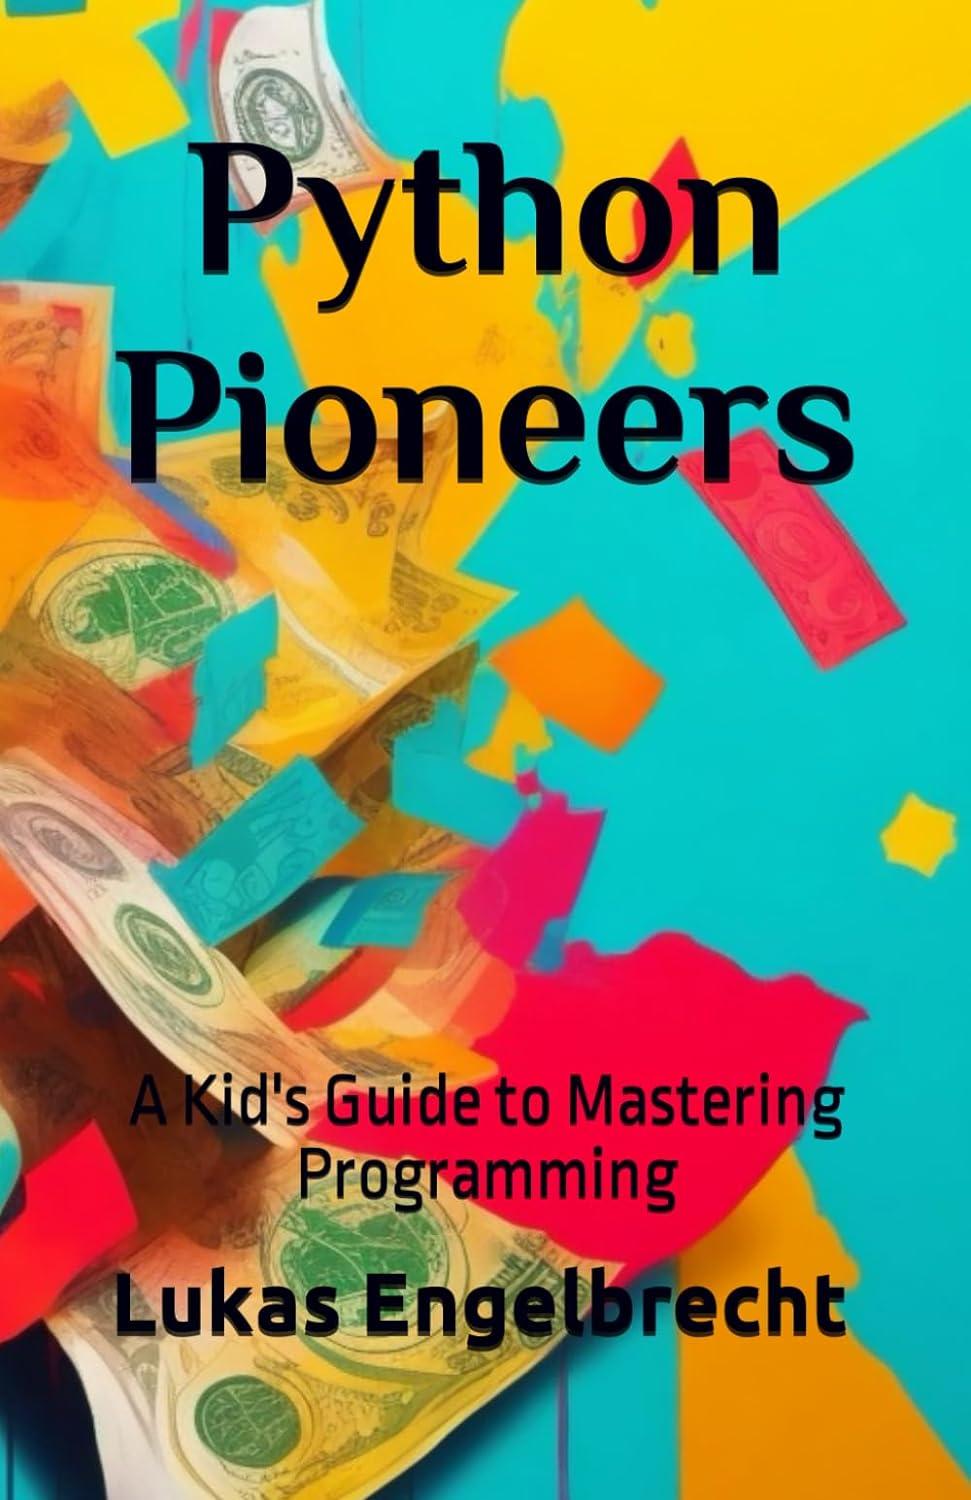 python pioneers a kid's guide to mastering programming 1st edition lukas engelbrecht b0cl38qs29,